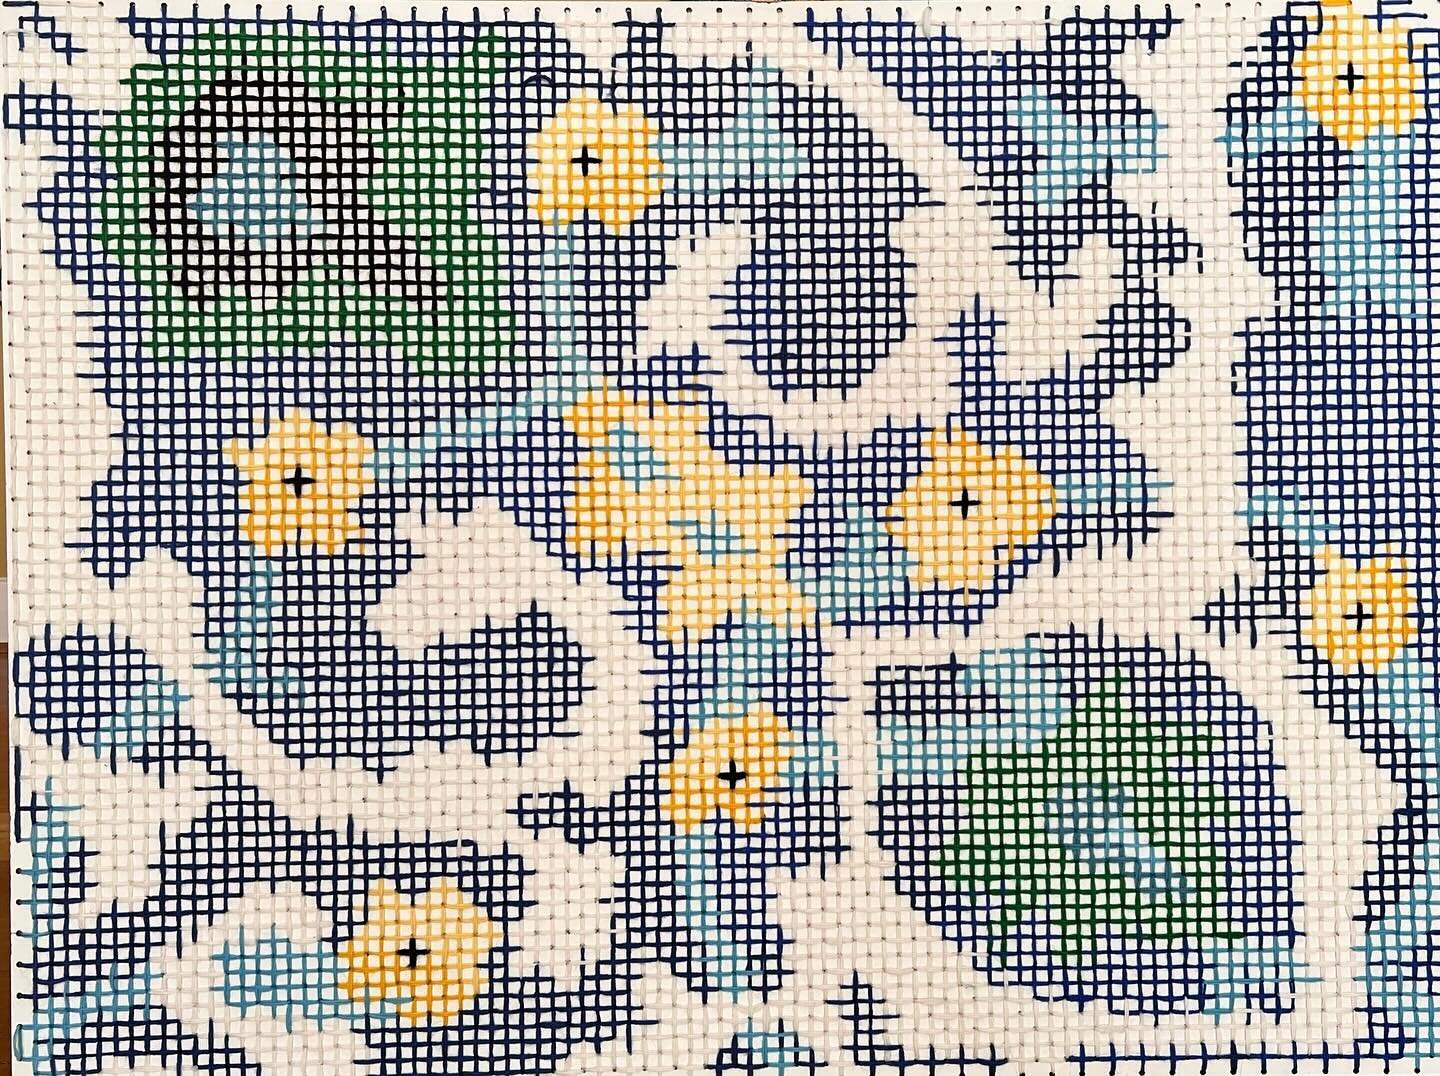 Experimenting with a new form: peg board cross stitch! This piece is inspired by a small section of decorative tiles found on an external wall at the Blue Mosque, Afghanistan. 

This approach may be an effective way of occupying a very large space, b